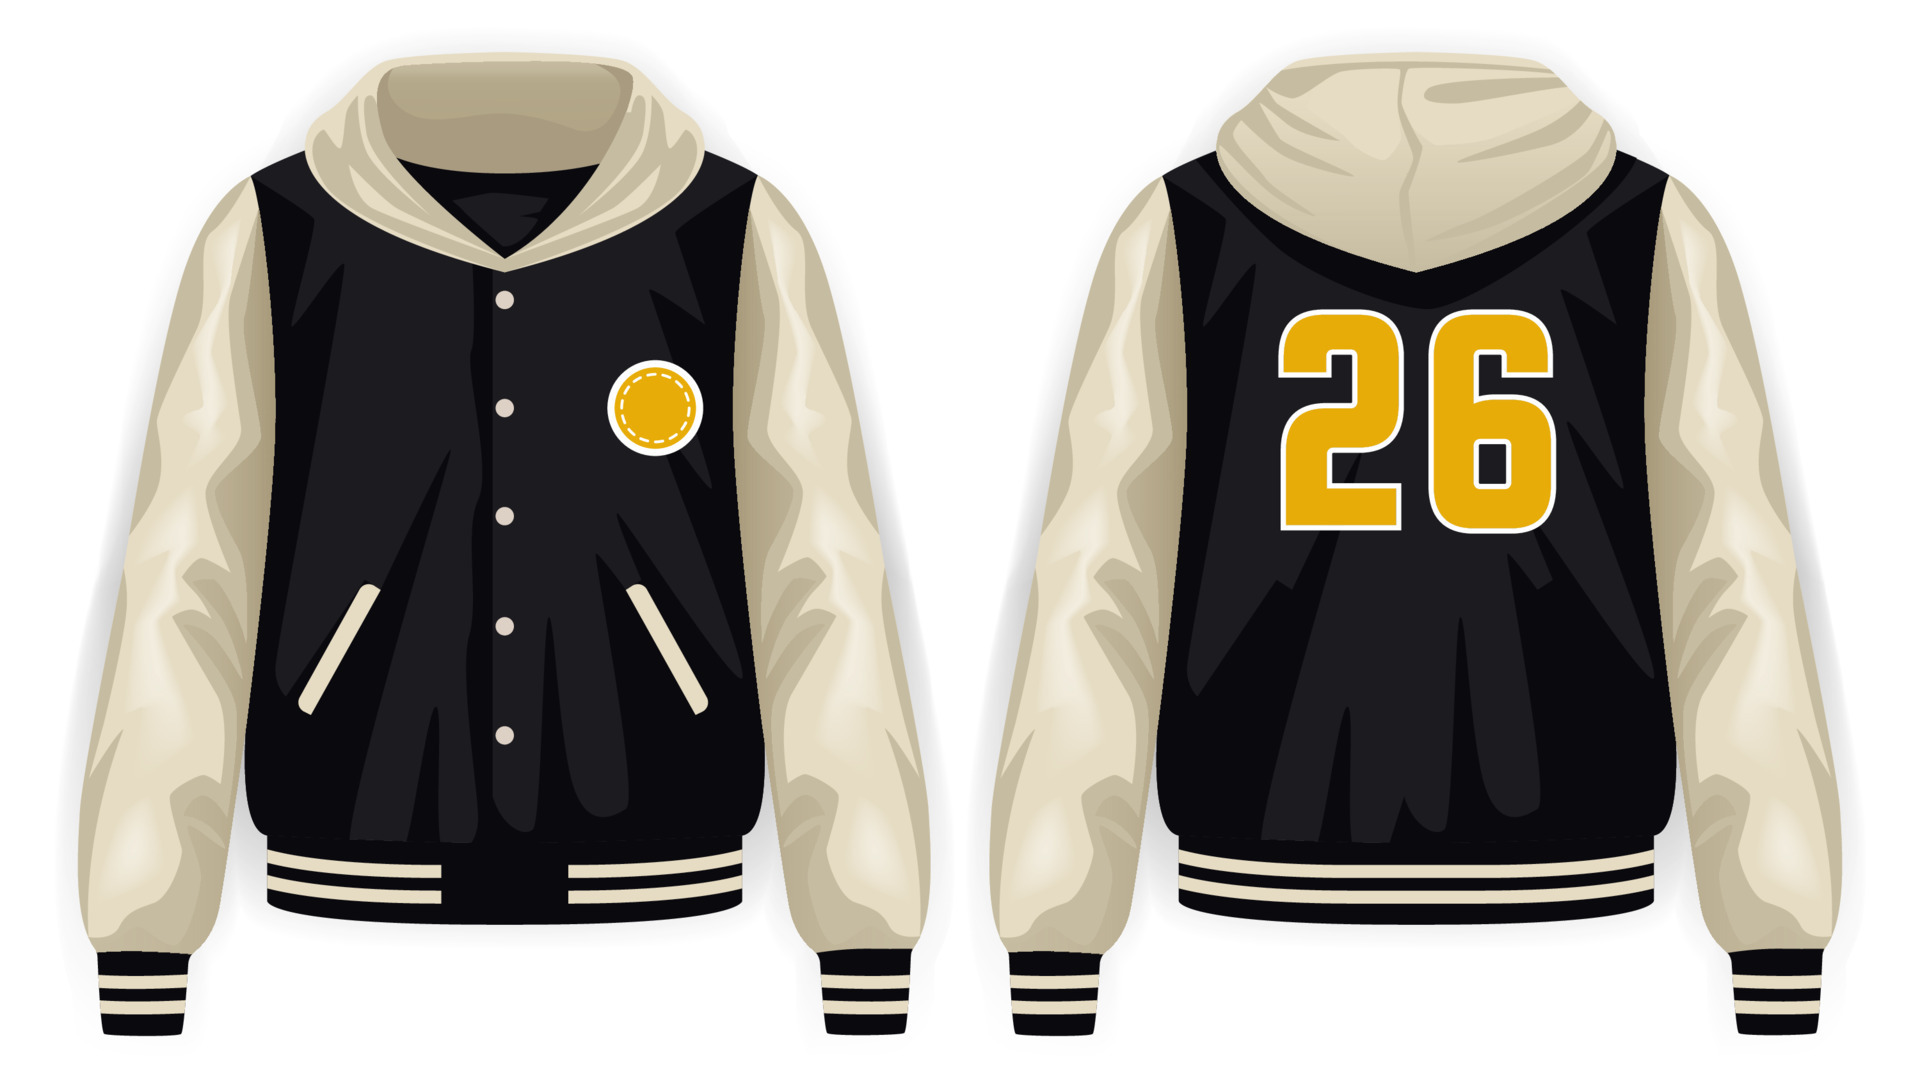 Black, yellow and beige varsity jacket with hoodie front and back